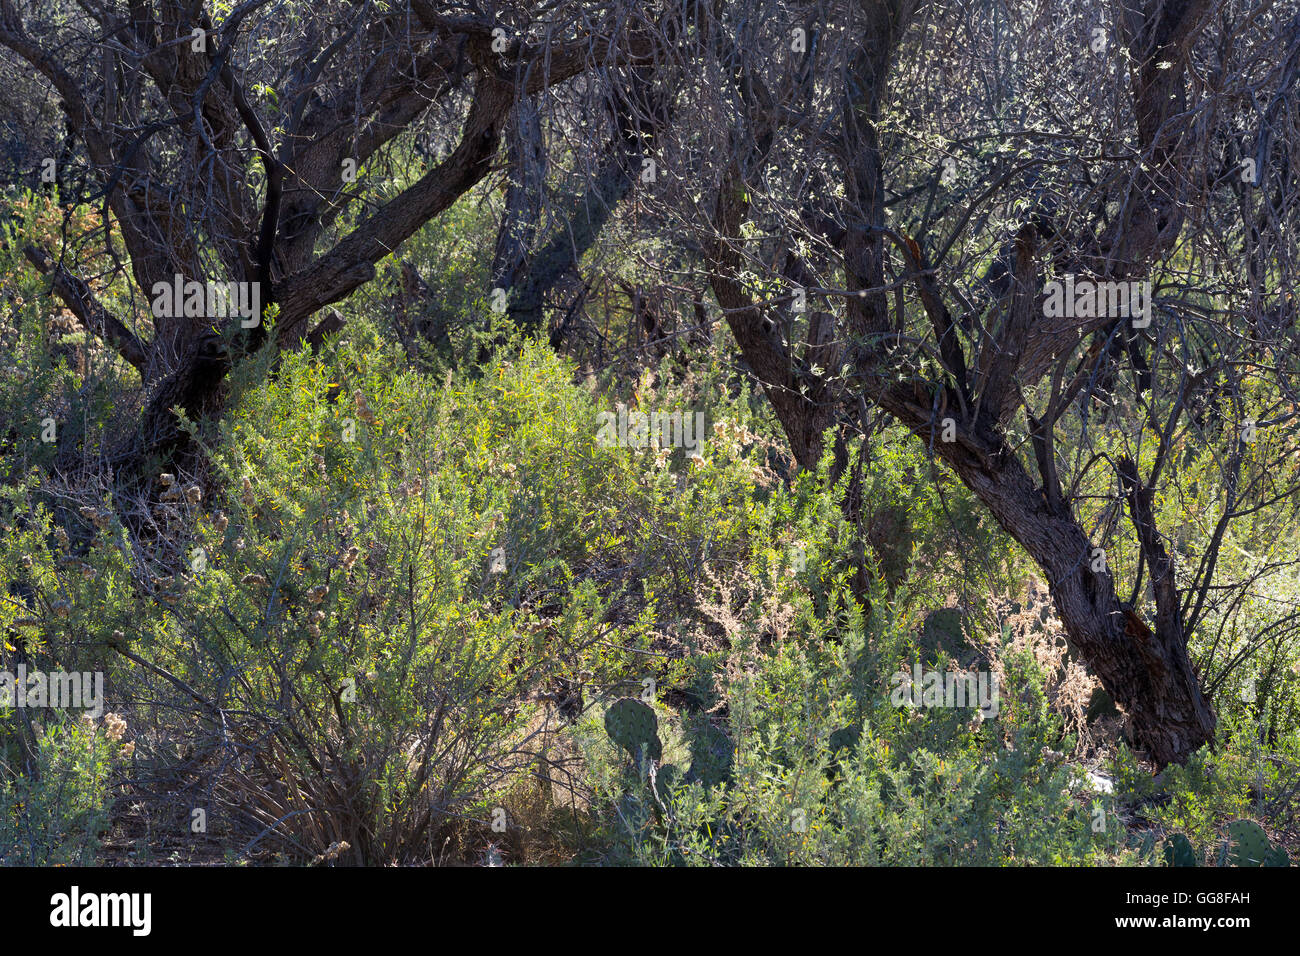 Mesquite trees growing above and covering ground brush along the ...